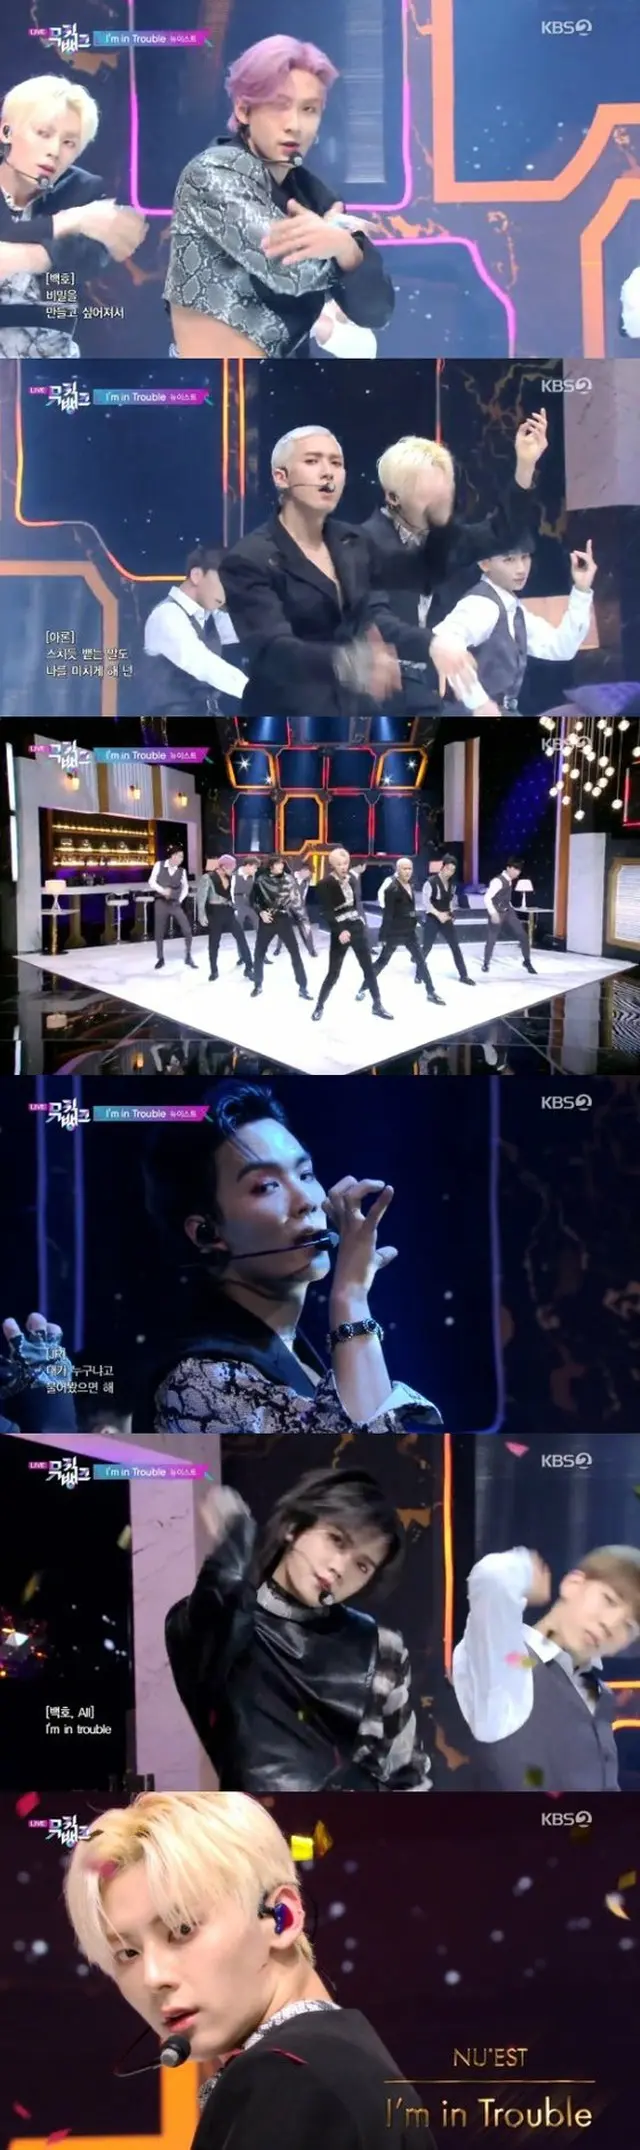 「NU'EST」、「MUSIC BANK」で披露した歴代最高のセクシーさ=新曲「I’m in Trouble」（提供:News1）